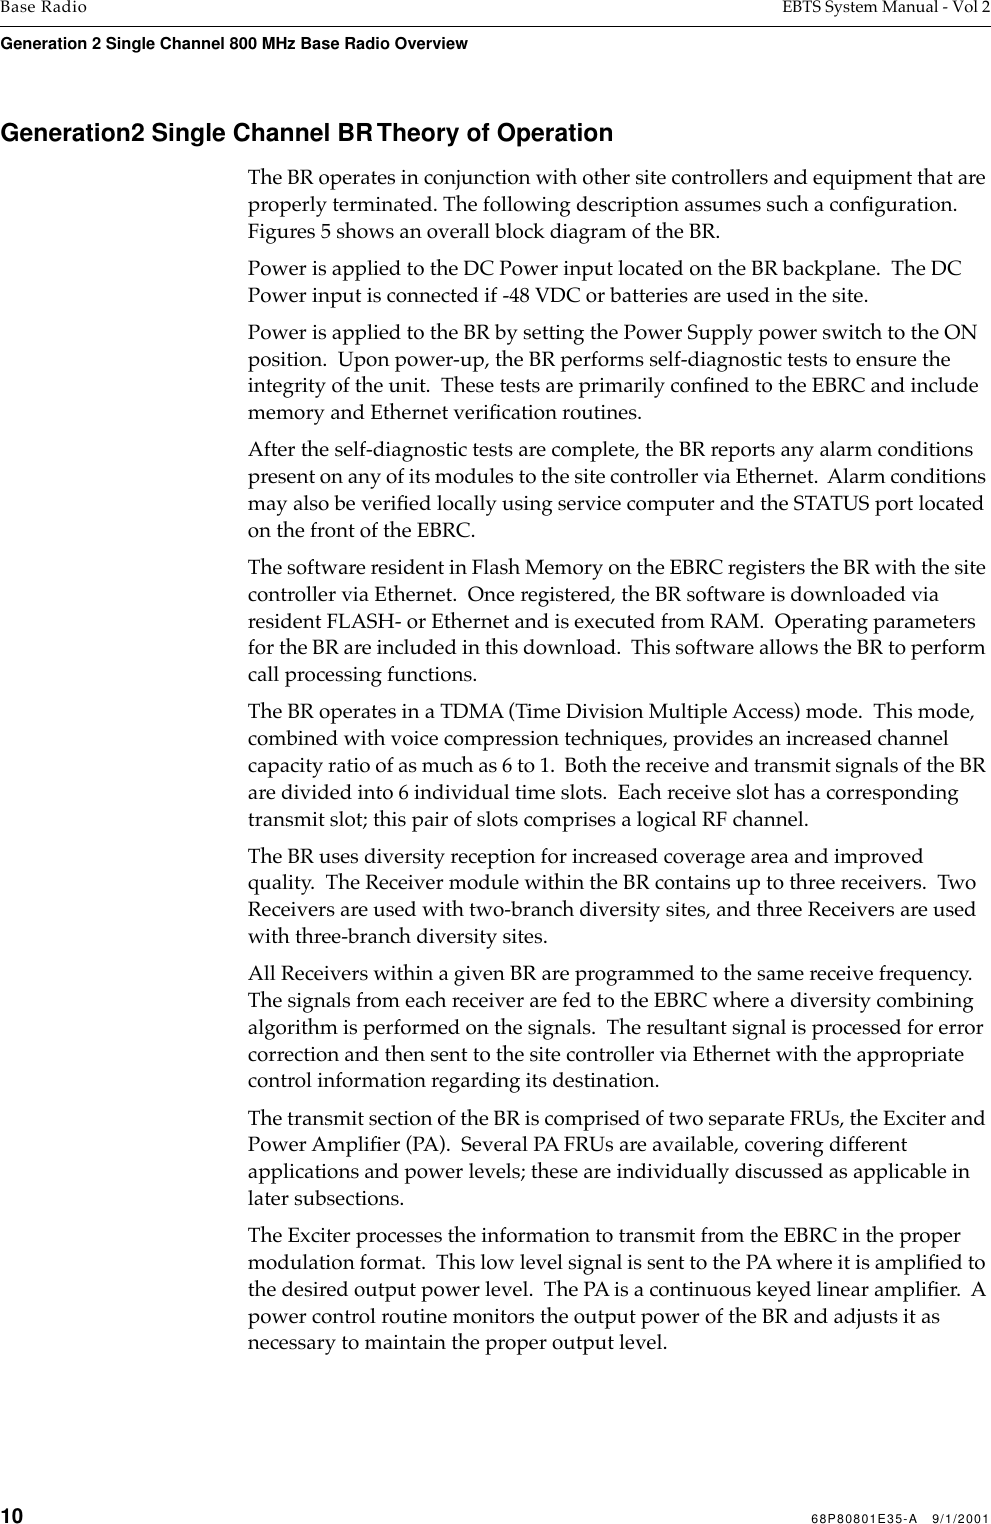 10 68P80801E35-A   9/1/2001Base Radio EBTS System Manual - Vol 2Generation 2 Single Channel 800 MHz Base Radio Overview Generation2 Single Channel BR Theory of OperationThe BR operates in conjunction with other site controllers and equipment that are properly terminated. The following description assumes such a conﬁguration. Figures 5 shows an overall block diagram of the BR.Power is applied to the DC Power input located on the BR backplane.  The DC Power input is connected if -48 VDC or batteries are used in the site. Power is applied to the BR by setting the Power Supply power switch to the ON position.  Upon power-up, the BR performs self-diagnostic tests to ensure the integrity of the unit.  These tests are primarily conﬁned to the EBRC and include memory and Ethernet veriﬁcation routines. After the self-diagnostic tests are complete, the BR reports any alarm conditions present on any of its modules to the site controller via Ethernet.  Alarm conditions may also be veriﬁed locally using service computer and the STATUS port located on the front of the EBRC.The software resident in Flash Memory on the EBRC registers the BR with the site controller via Ethernet.  Once registered, the BR software is downloaded via resident FLASH- or Ethernet and is executed from RAM.  Operating parameters for the BR are included in this download.  This software allows the BR to perform call processing functions. The BR operates in a TDMA (Time Division Multiple Access) mode.  This mode, combined with voice compression techniques, provides an increased channel capacity ratio of as much as 6 to 1.  Both the receive and transmit signals of the BR are divided into 6 individual time slots.  Each receive slot has a corresponding transmit slot; this pair of slots comprises a logical RF channel. The BR uses diversity reception for increased coverage area and improved quality.  The Receiver module within the BR contains up to three receivers.  Two Receivers are used with two-branch diversity sites, and three Receivers are used with three-branch diversity sites. All Receivers within a given BR are programmed to the same receive frequency.  The signals from each receiver are fed to the EBRC where a diversity combining algorithm is performed on the signals.  The resultant signal is processed for error correction and then sent to the site controller via Ethernet with the appropriate control information regarding its destination.The transmit section of the BR is comprised of two separate FRUs, the Exciter and Power Ampliﬁer (PA).  Several PA FRUs are available, covering different applications and power levels; these are individually discussed as applicable in later subsections.The Exciter processes the information to transmit from the EBRC in the proper modulation format.  This low level signal is sent to the PA where it is ampliﬁed to the desired output power level.  The PA is a continuous keyed linear ampliﬁer.  A power control routine monitors the output power of the BR and adjusts it as necessary to maintain the proper output level.